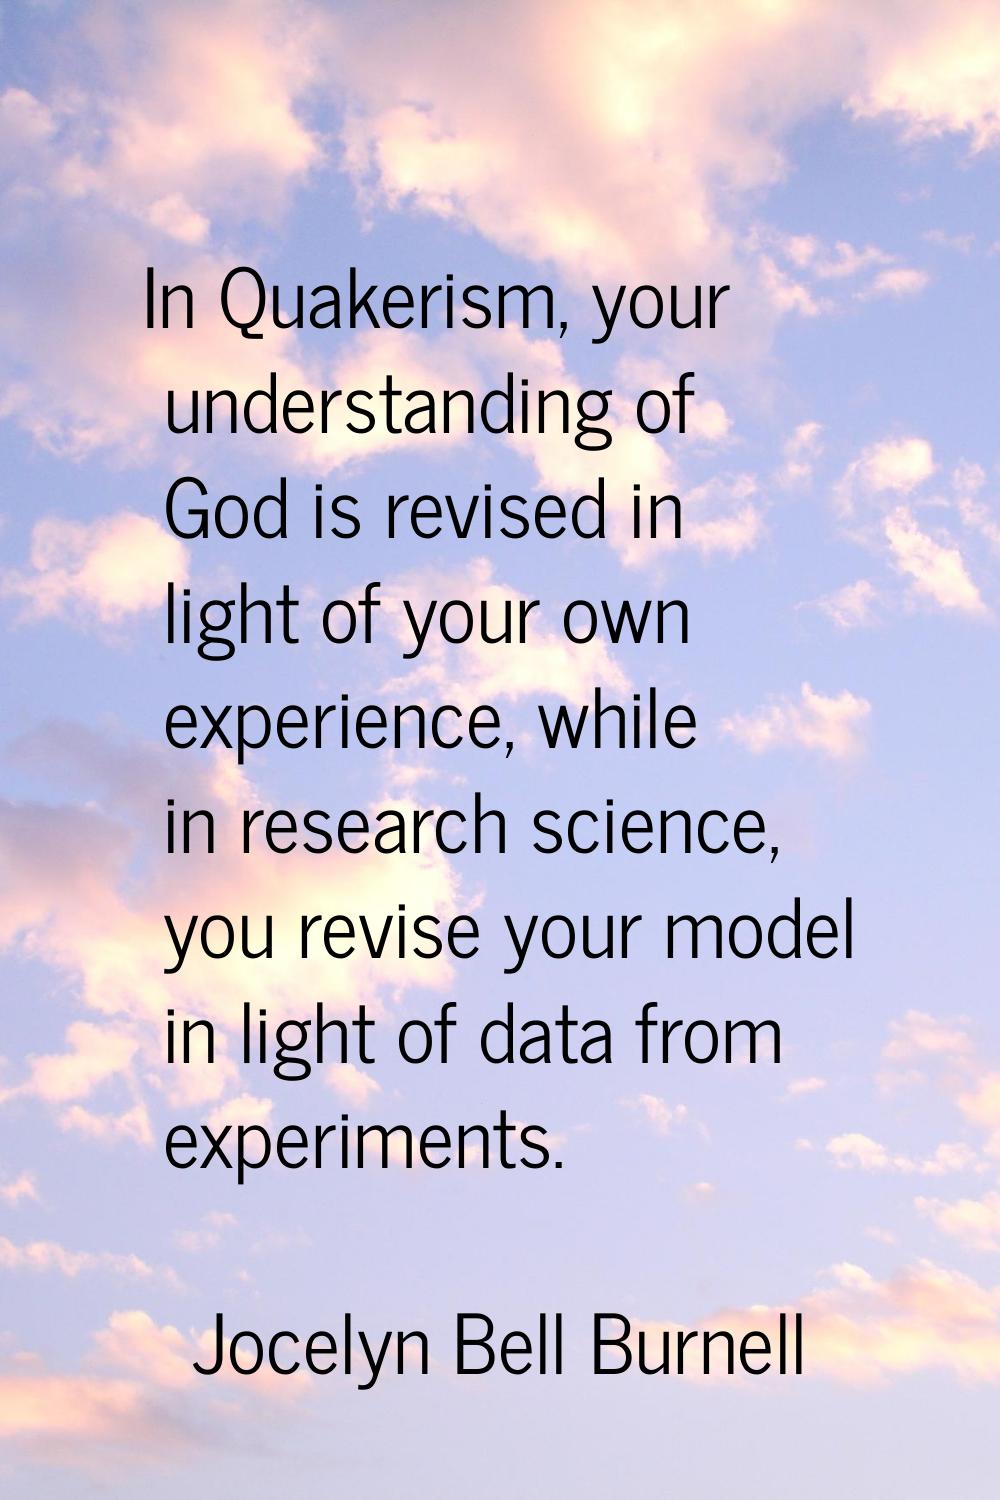 In Quakerism, your understanding of God is revised in light of your own experience, while in resear